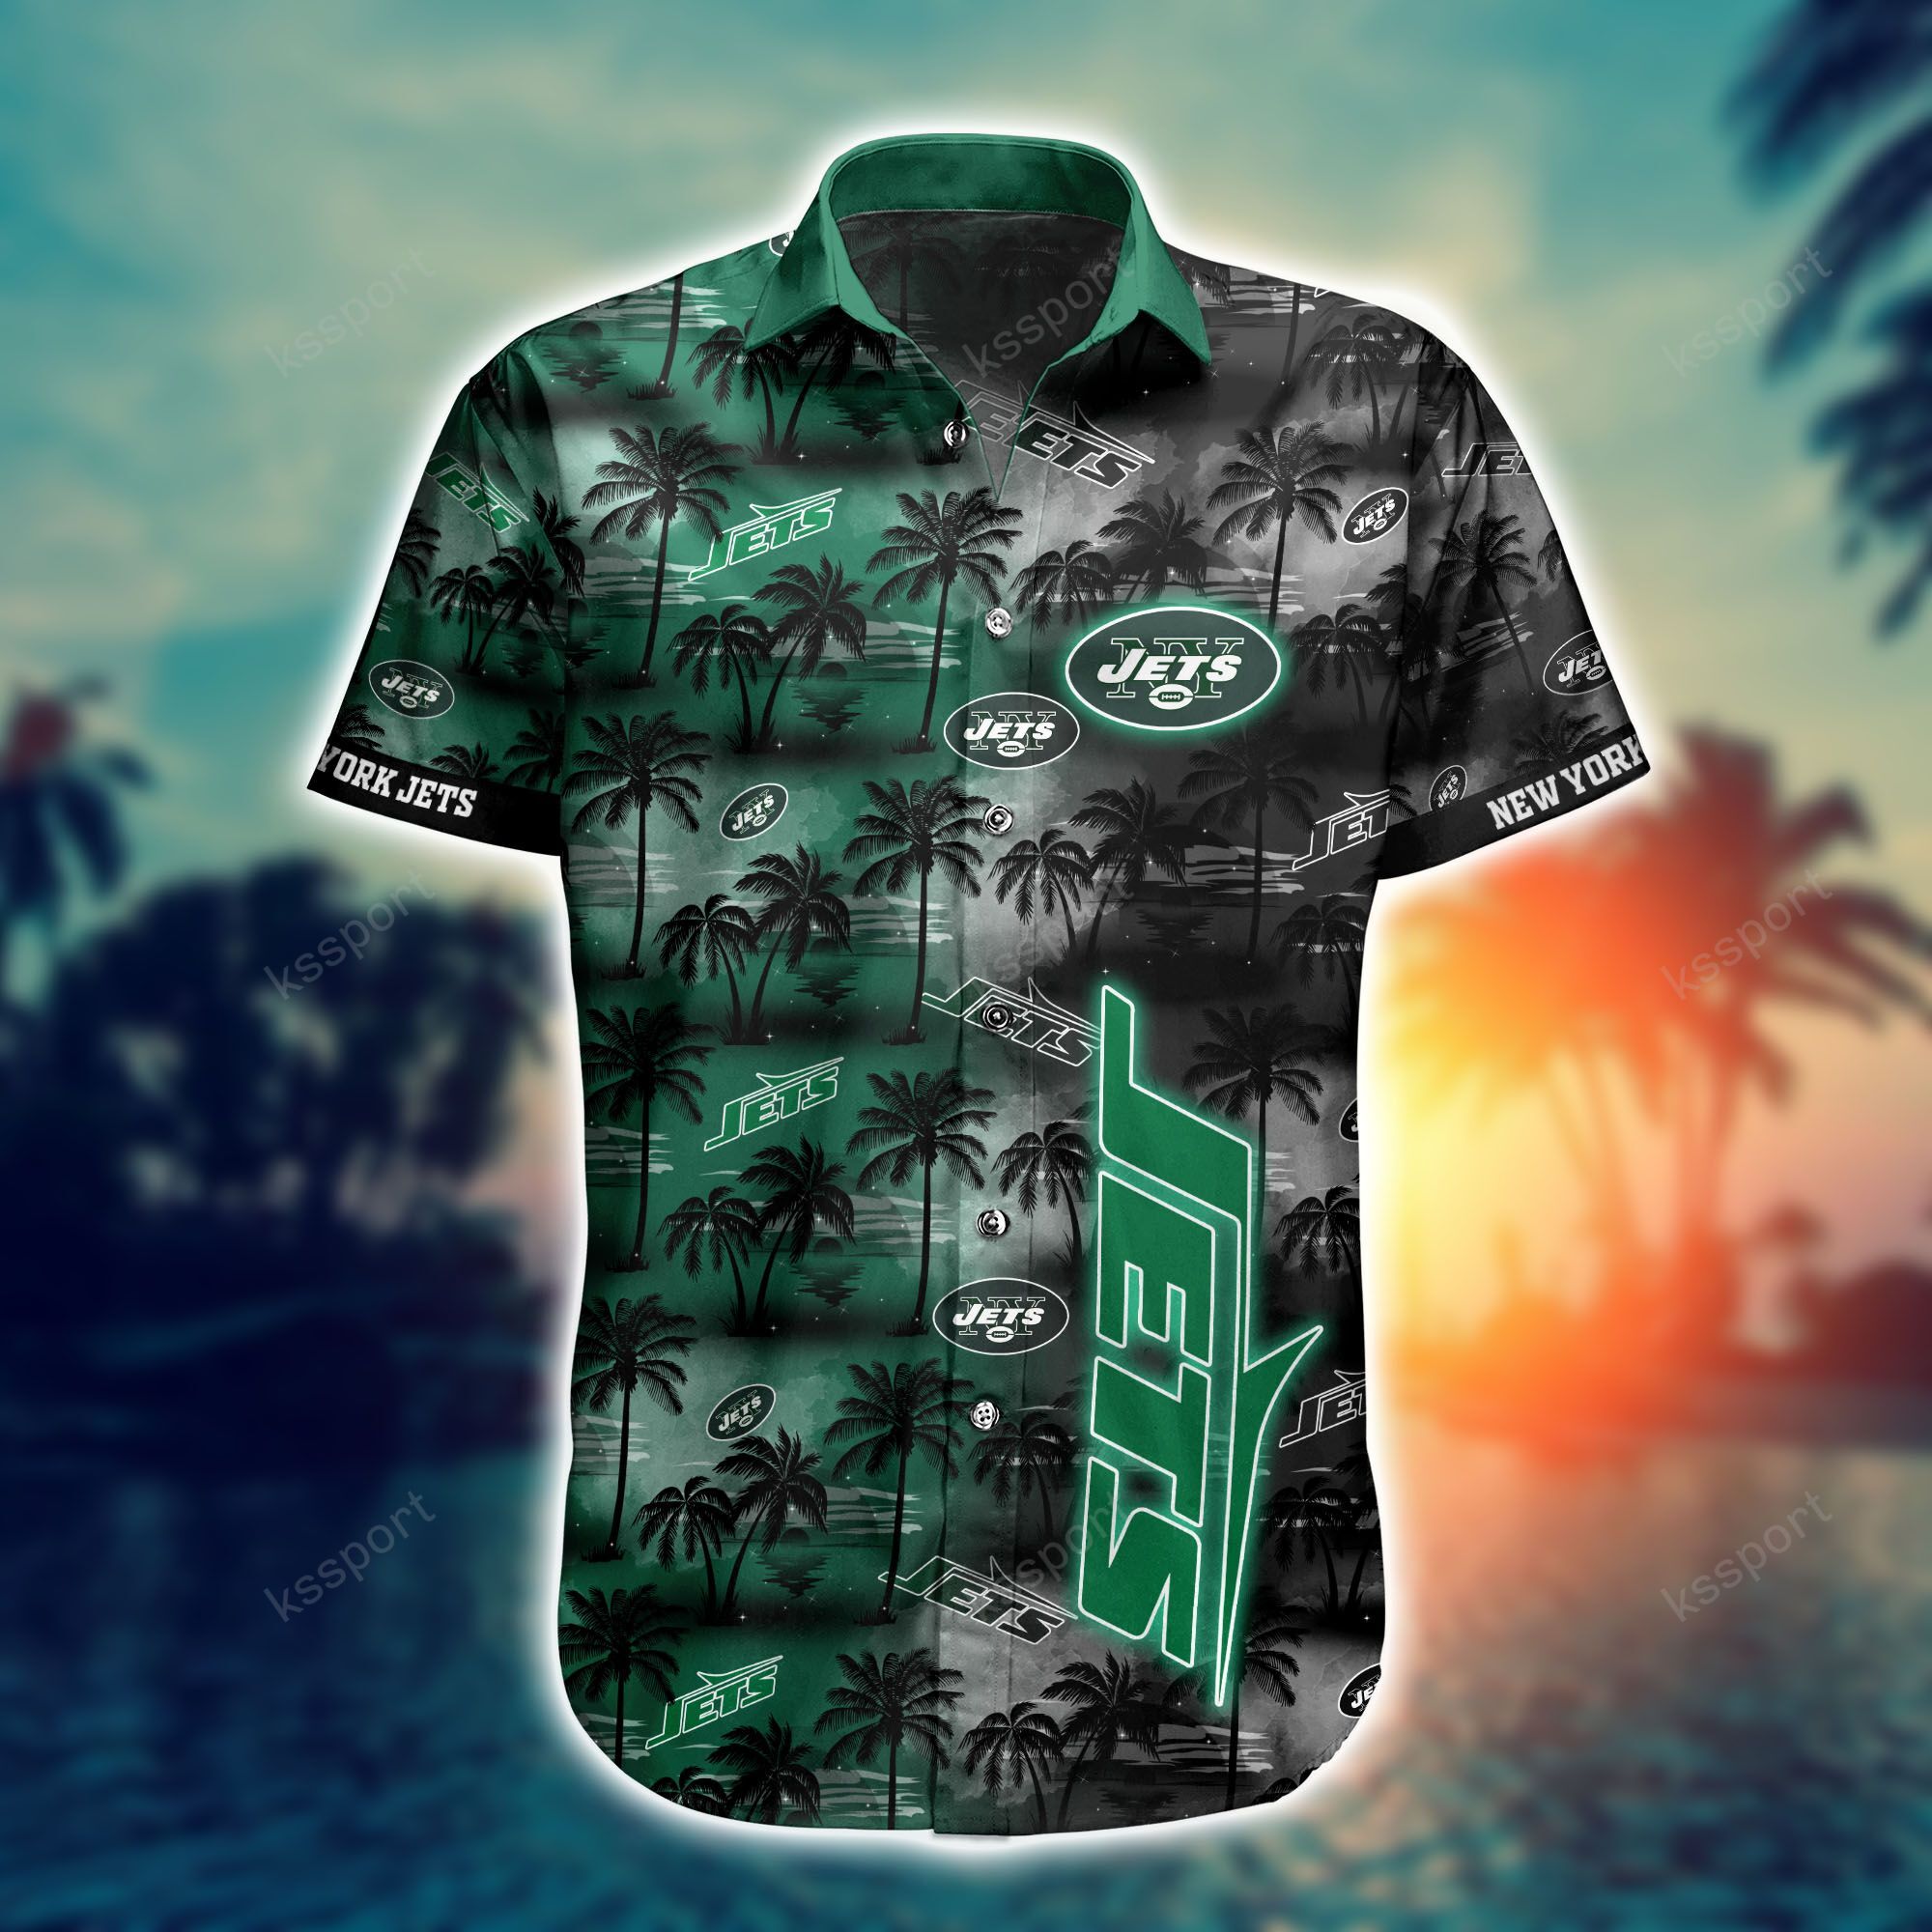 Top cool Hawaiian shirt 2022 - Make sure you get yours today before they run out! 207